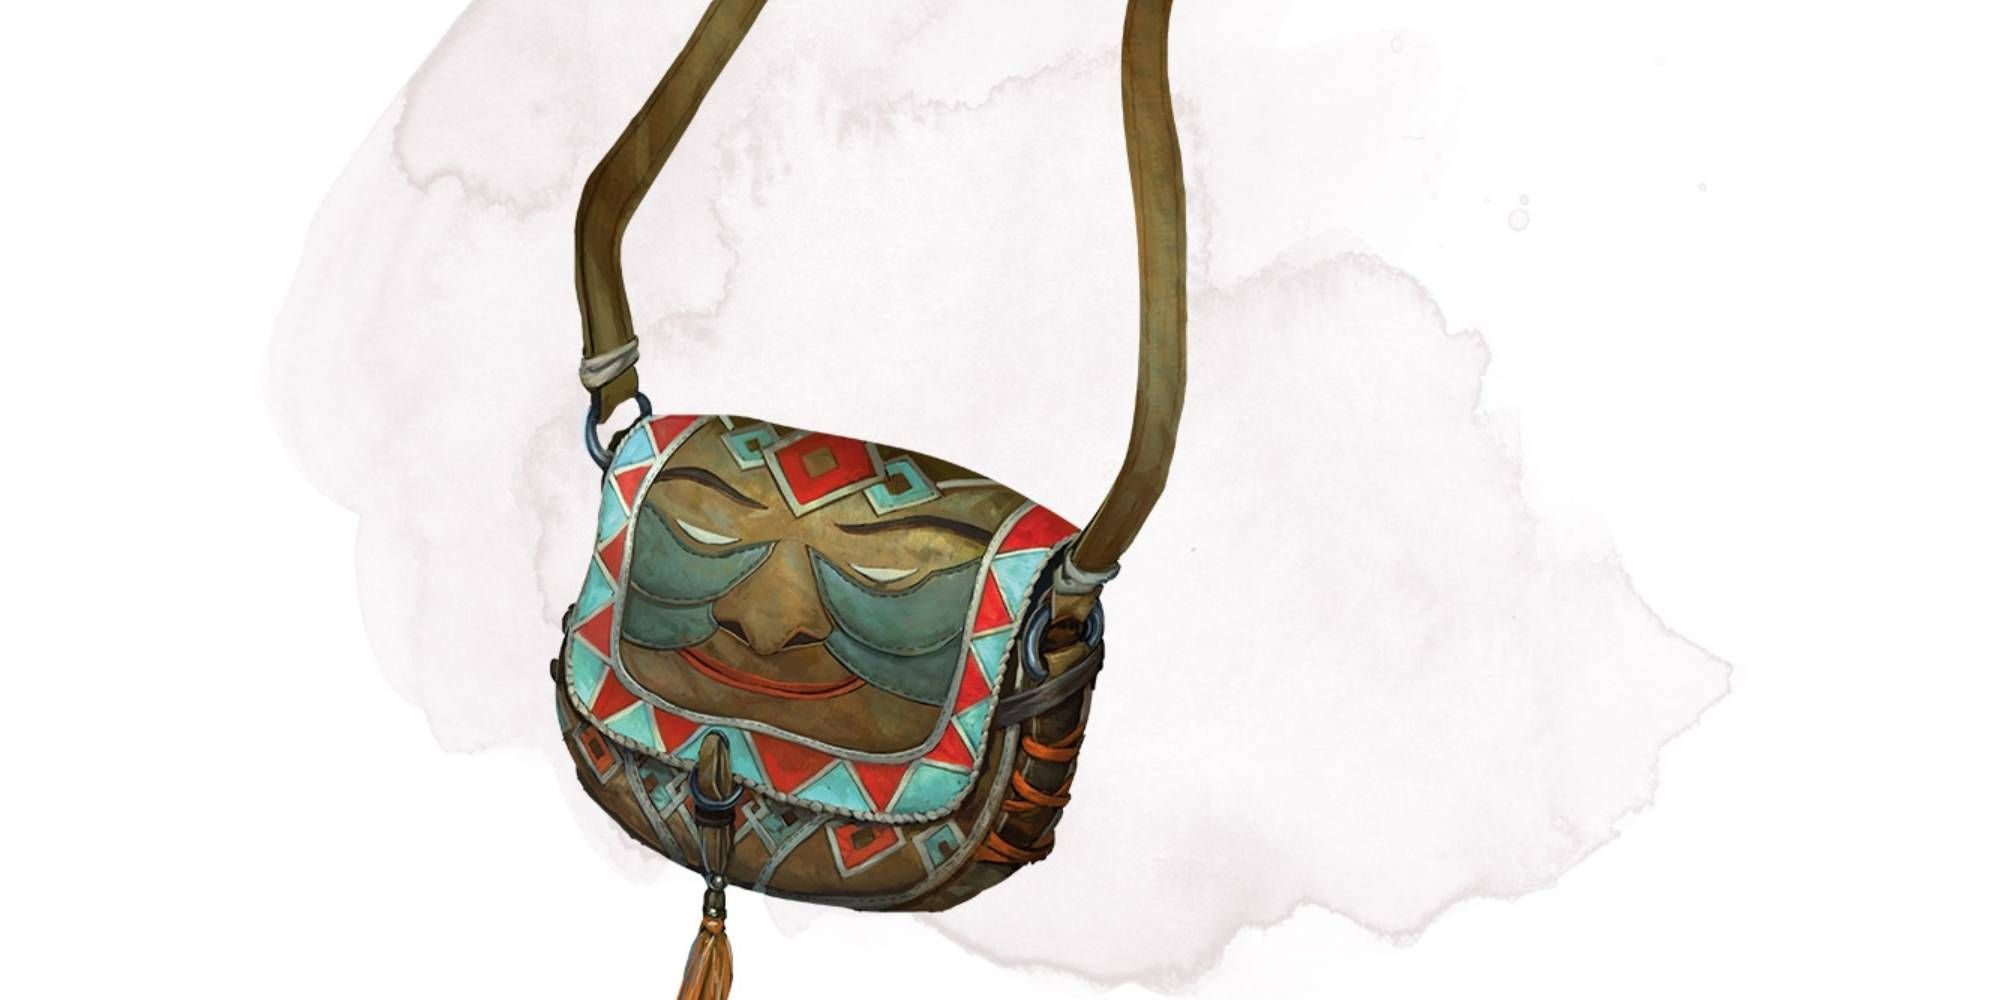 A colourful bag with a face upon it